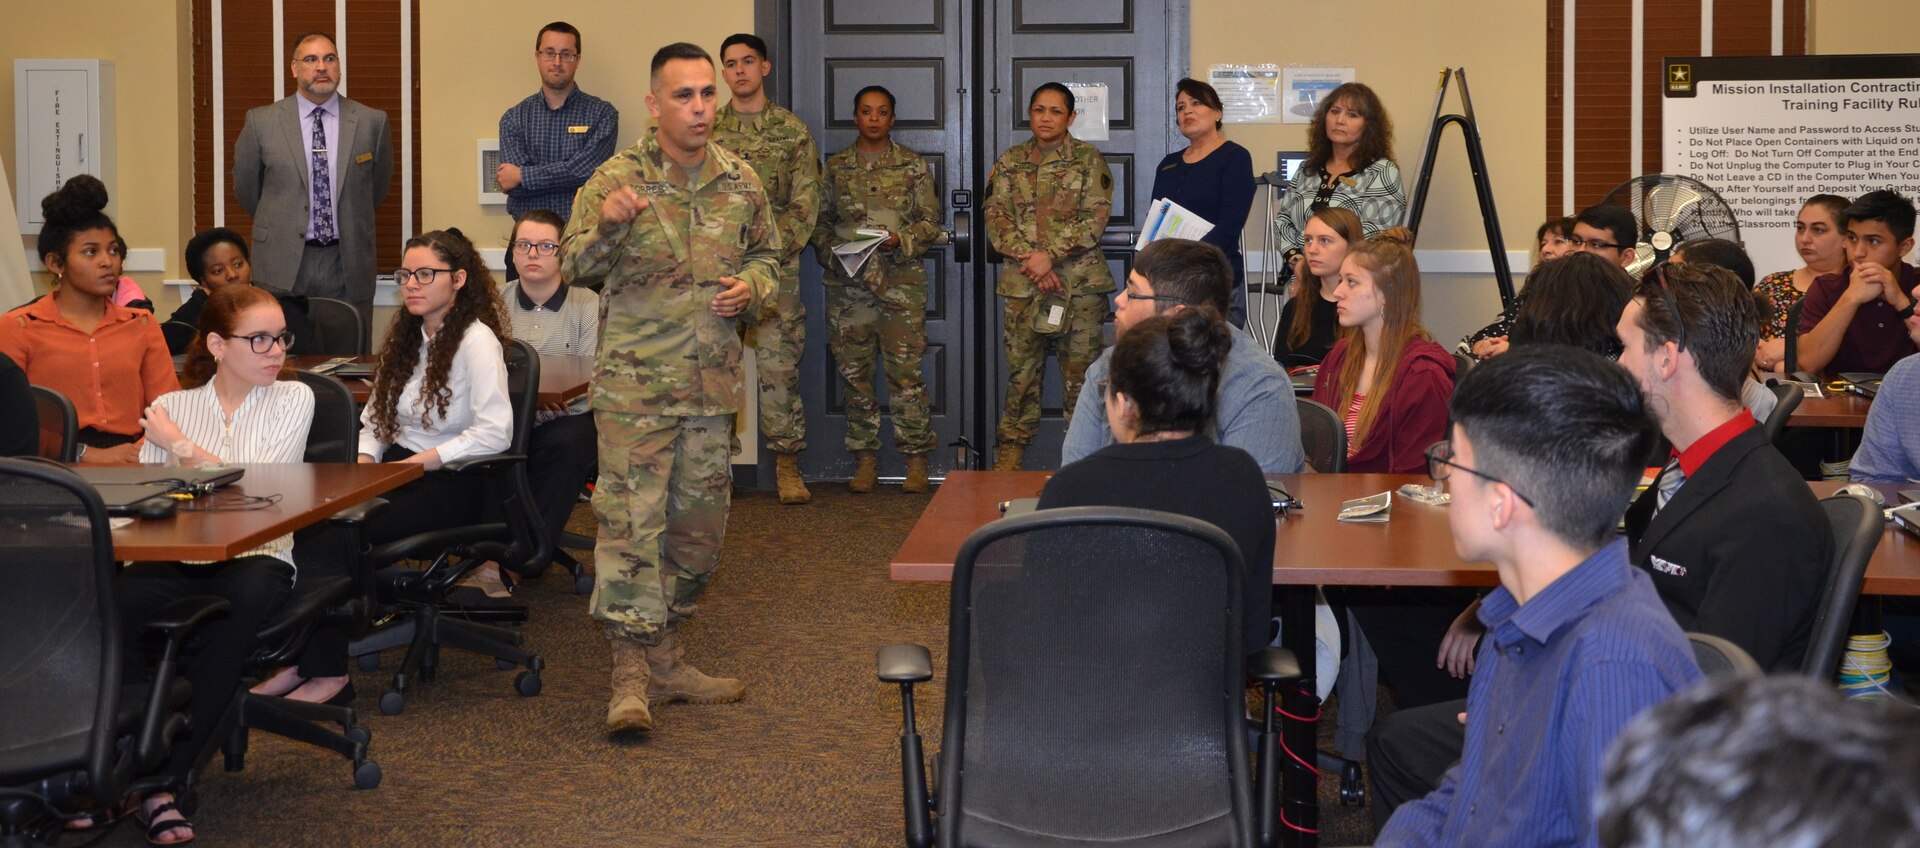 Command Sgt. Maj. Marco Torres mentors Churchill and Warren high school students as part of the San Antonio Job Shadow Day Feb. 5 at Joint Base San Antonio-Fort Sam Houston. Torres is the command sergeant major for the Mission and Installation Contracting Command.